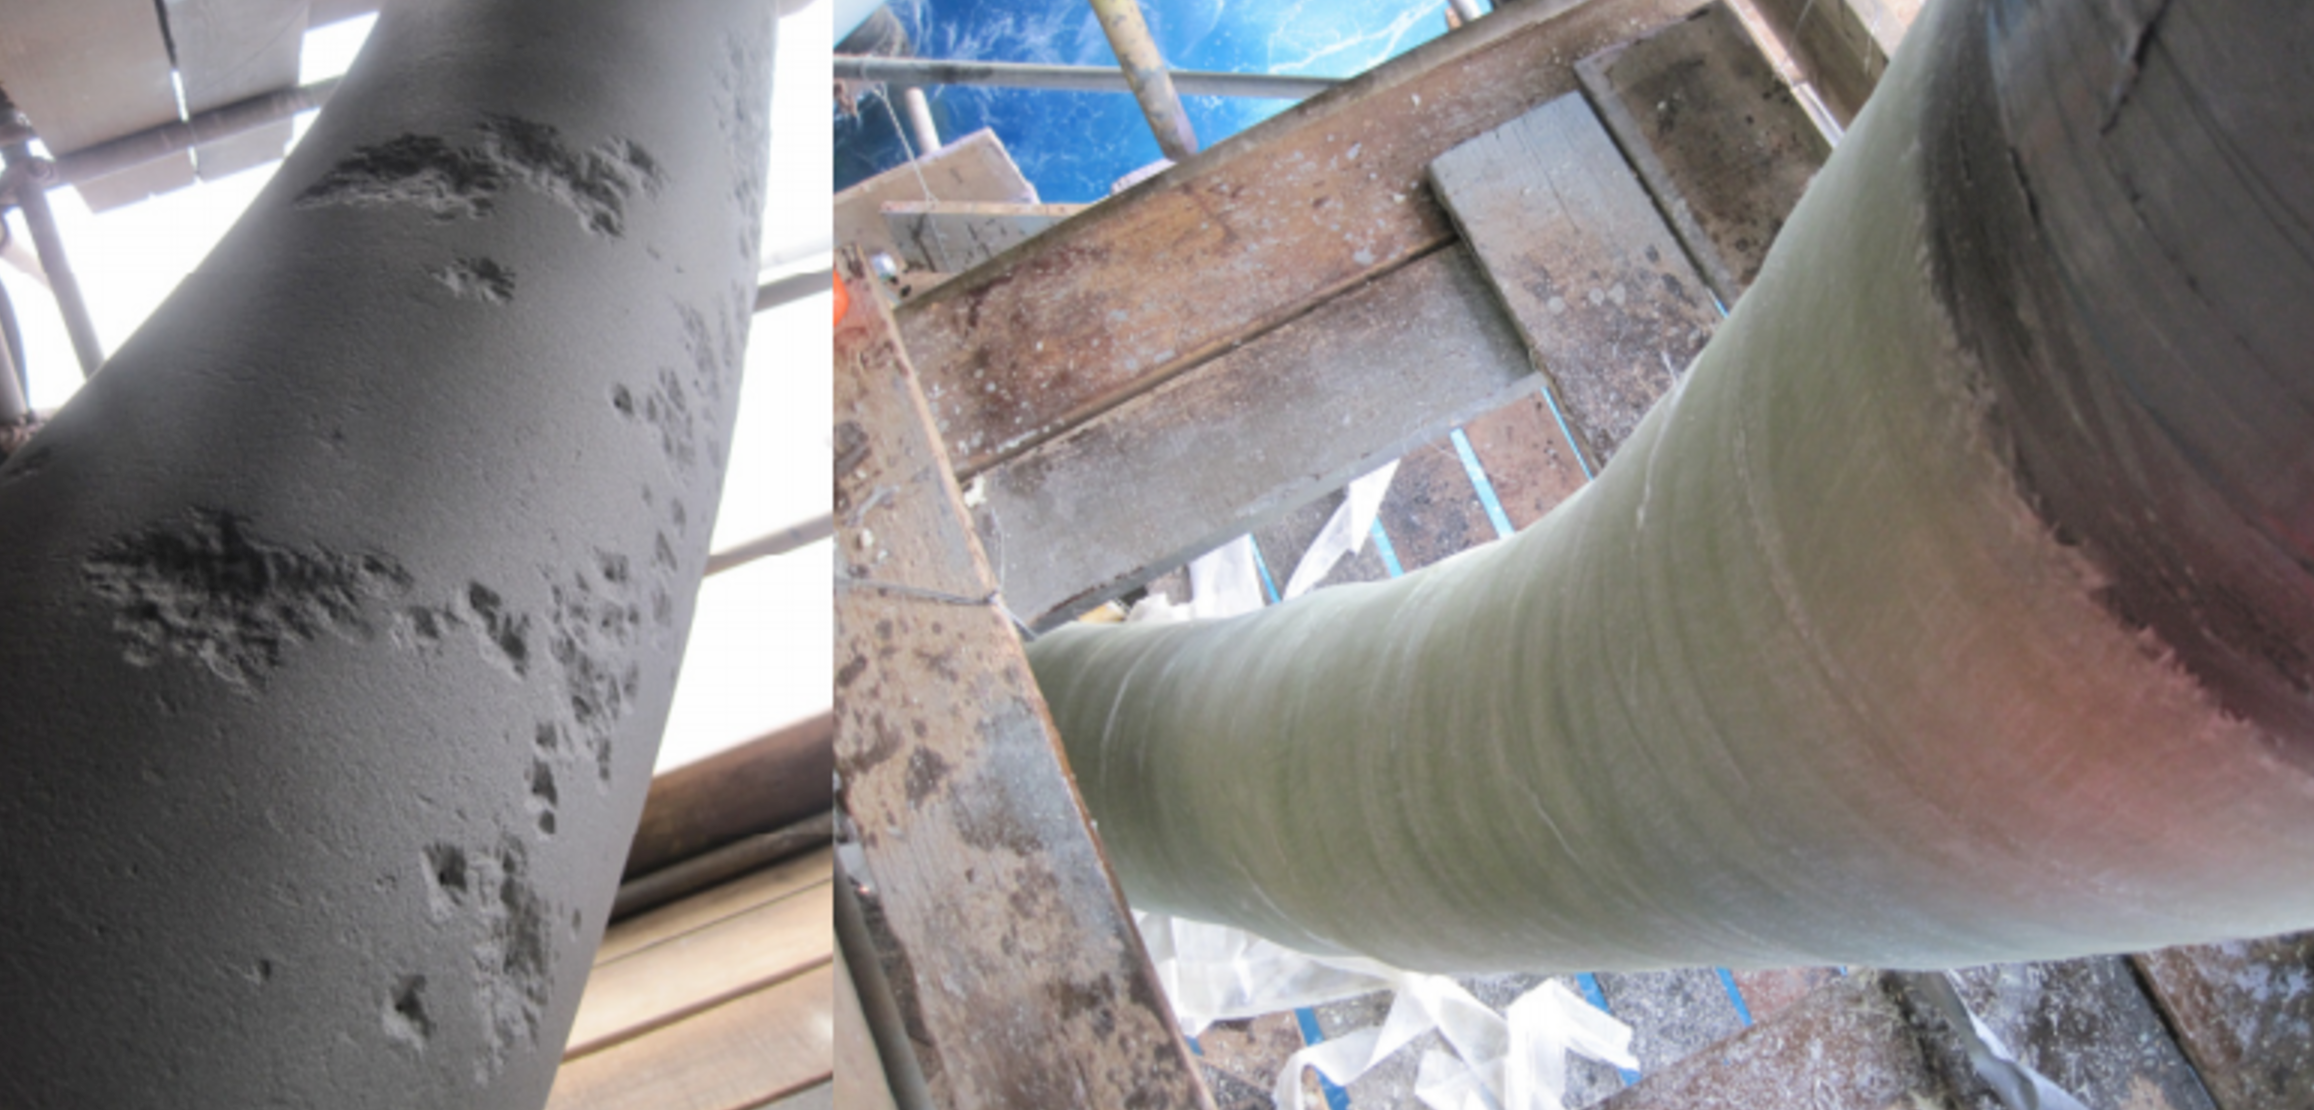 Riser repair: Before and after Contour installation